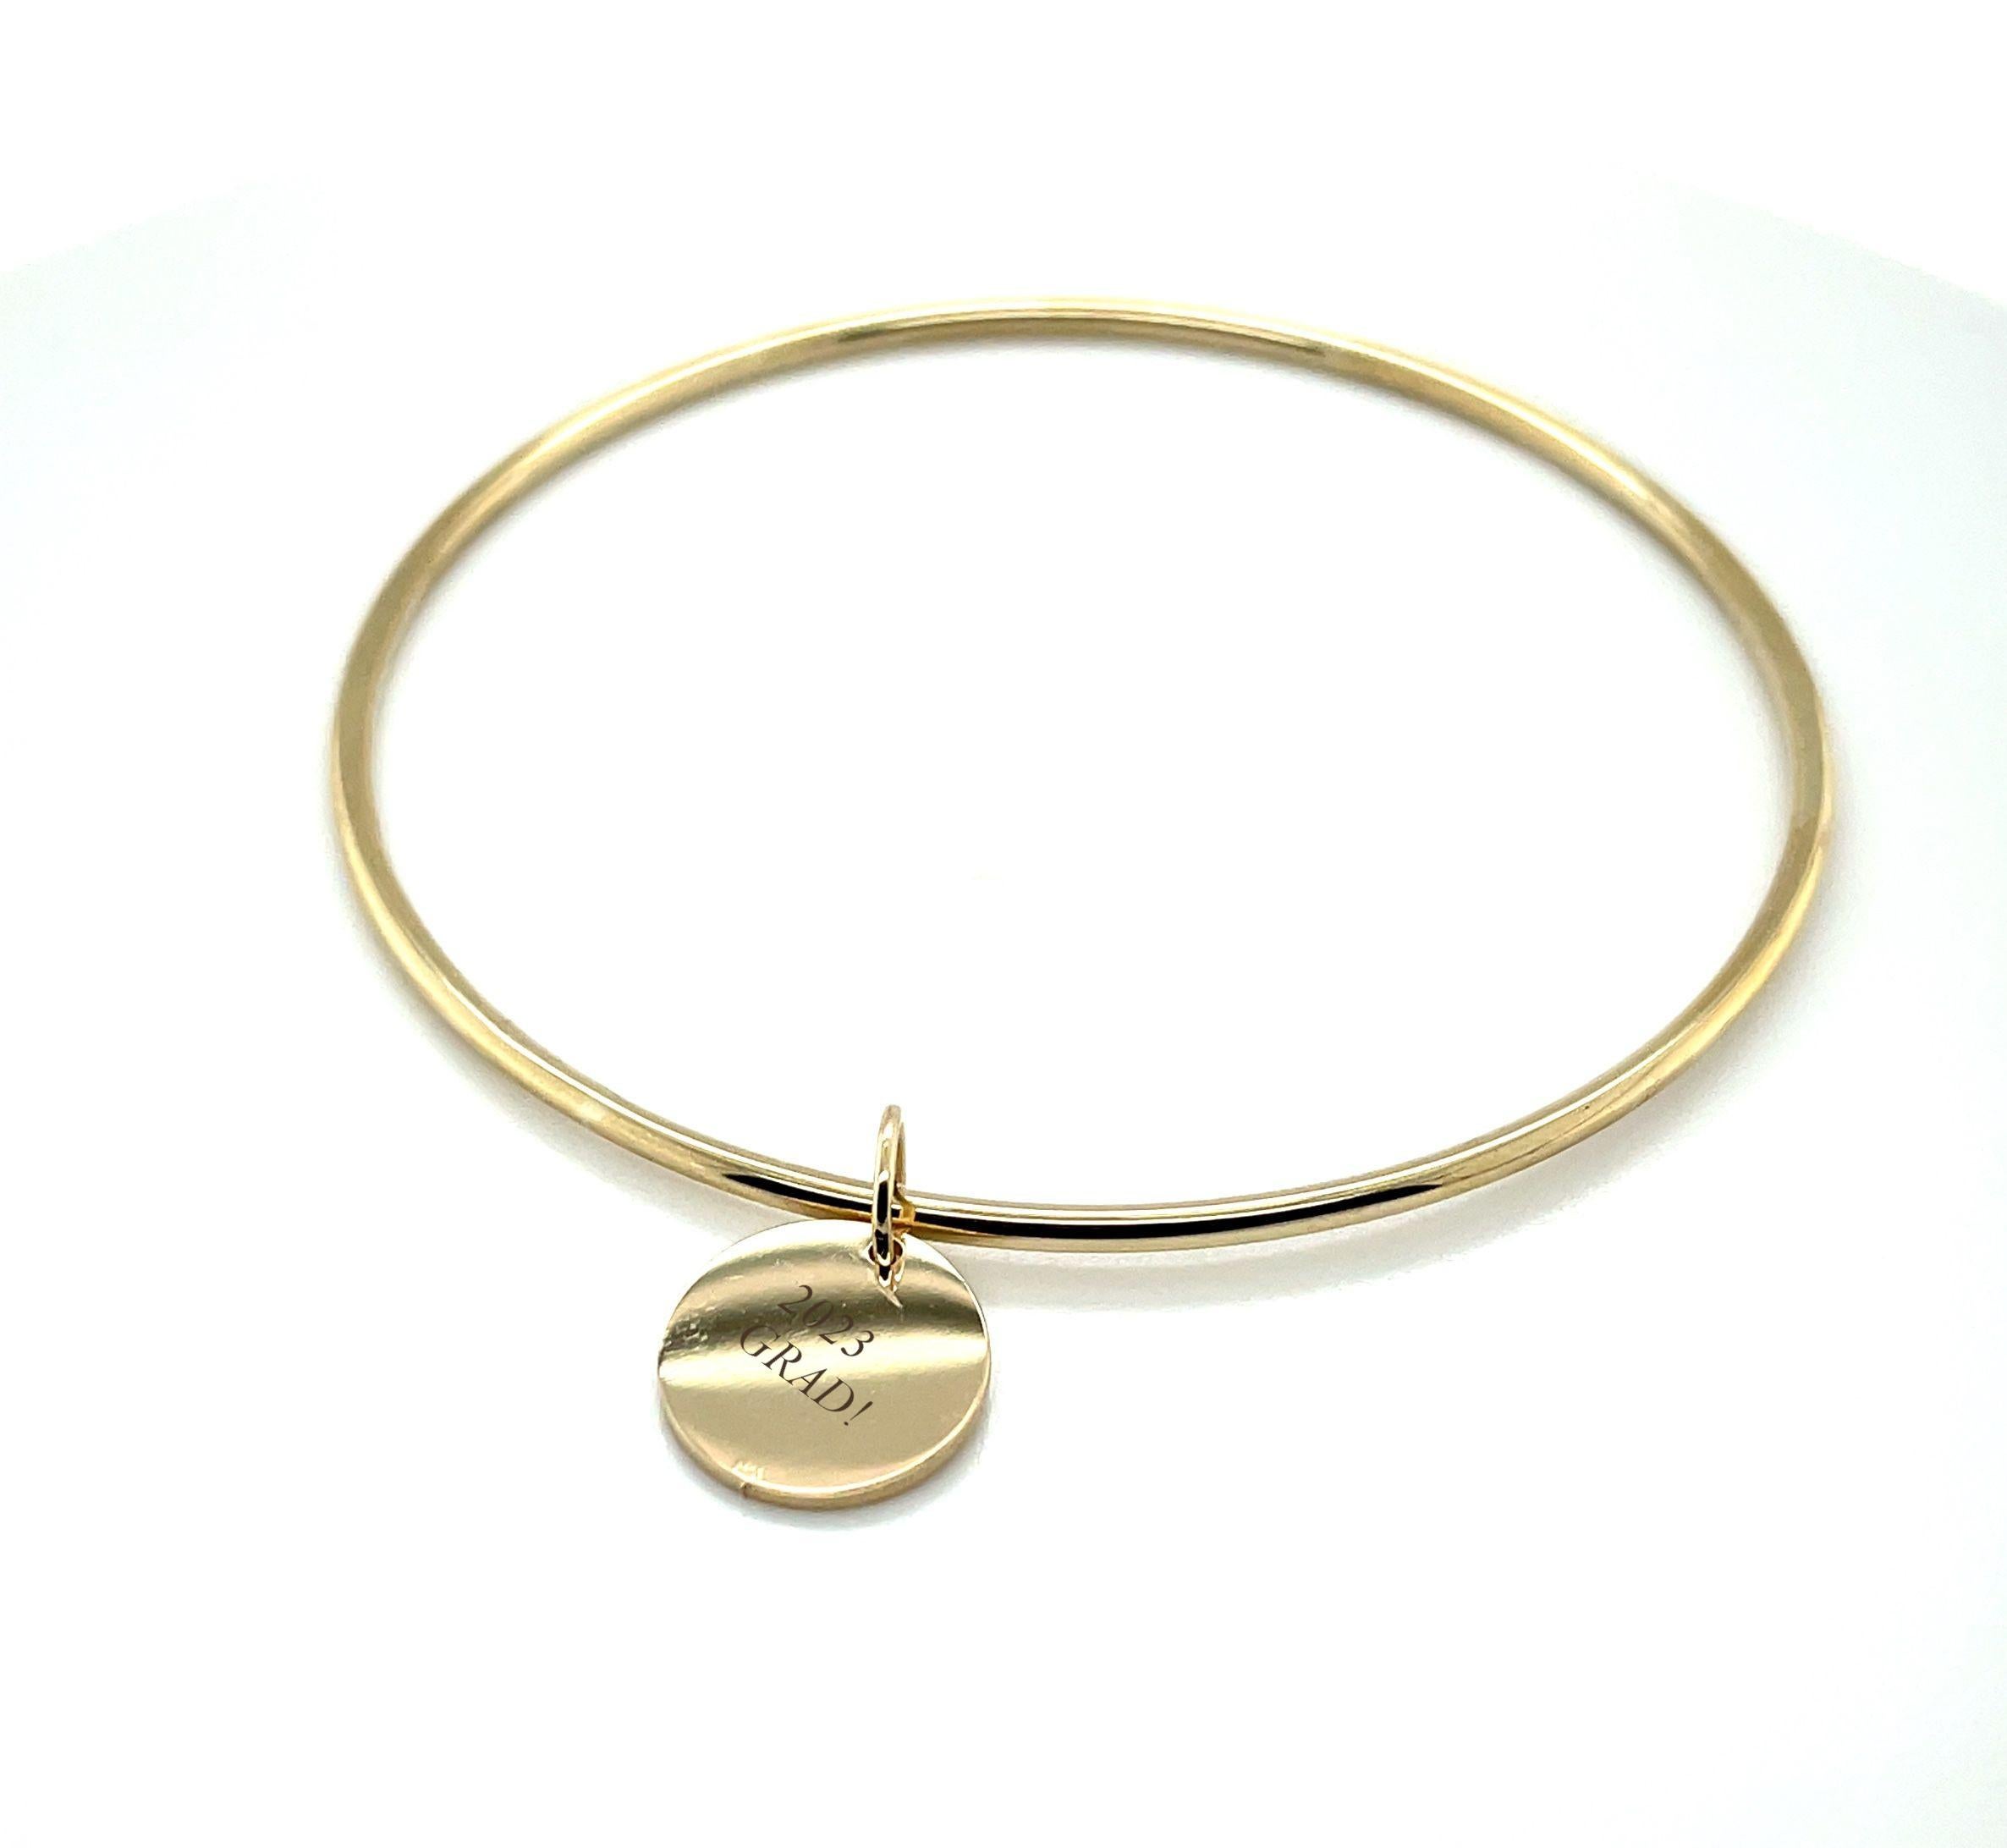 This pretty 14k yellow gold round bangle bracelet is a great way to dress up any outfit and give you that perfectly polished look! The round sliding charm measures 0.5